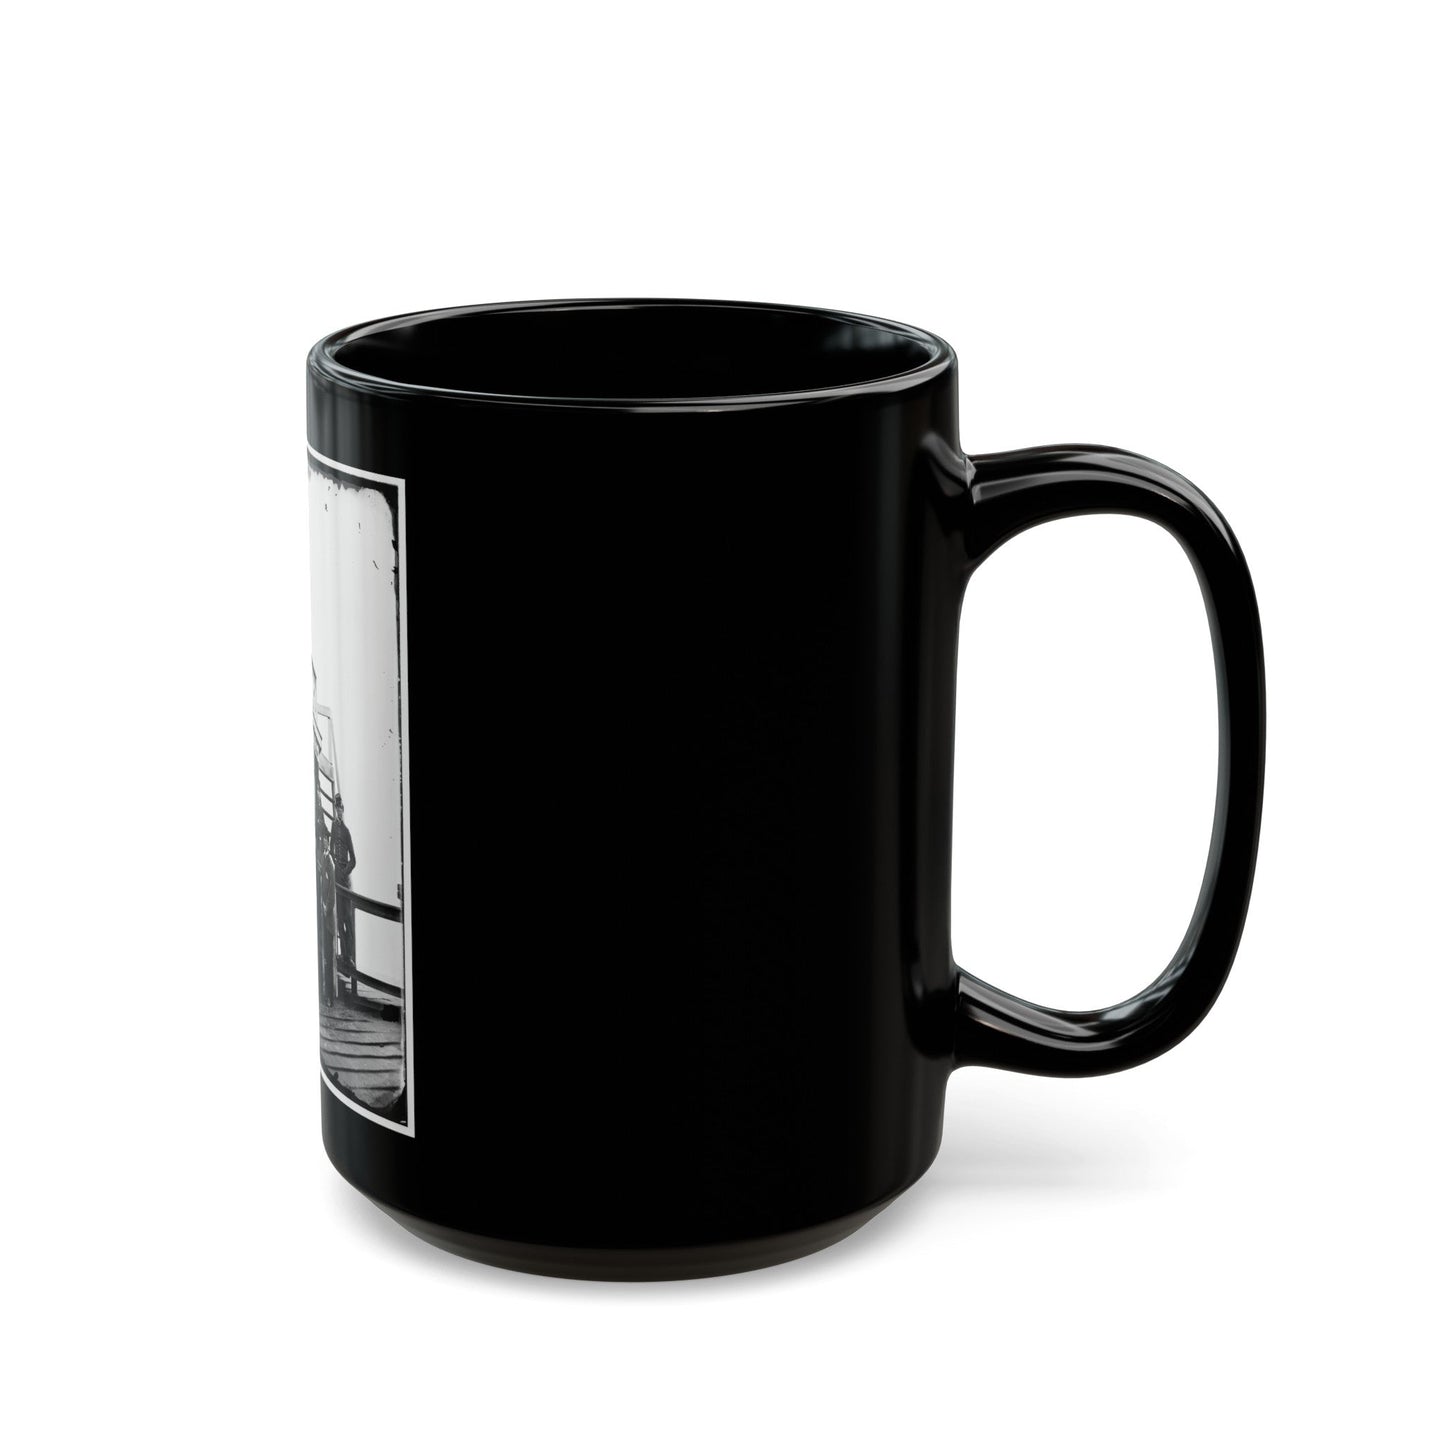 Washington, D.C. Central Signal Station, Winder Building, 17th And E Streets Nw, And Signal Corps Men (U.S. Civil War) Black Coffee Mug